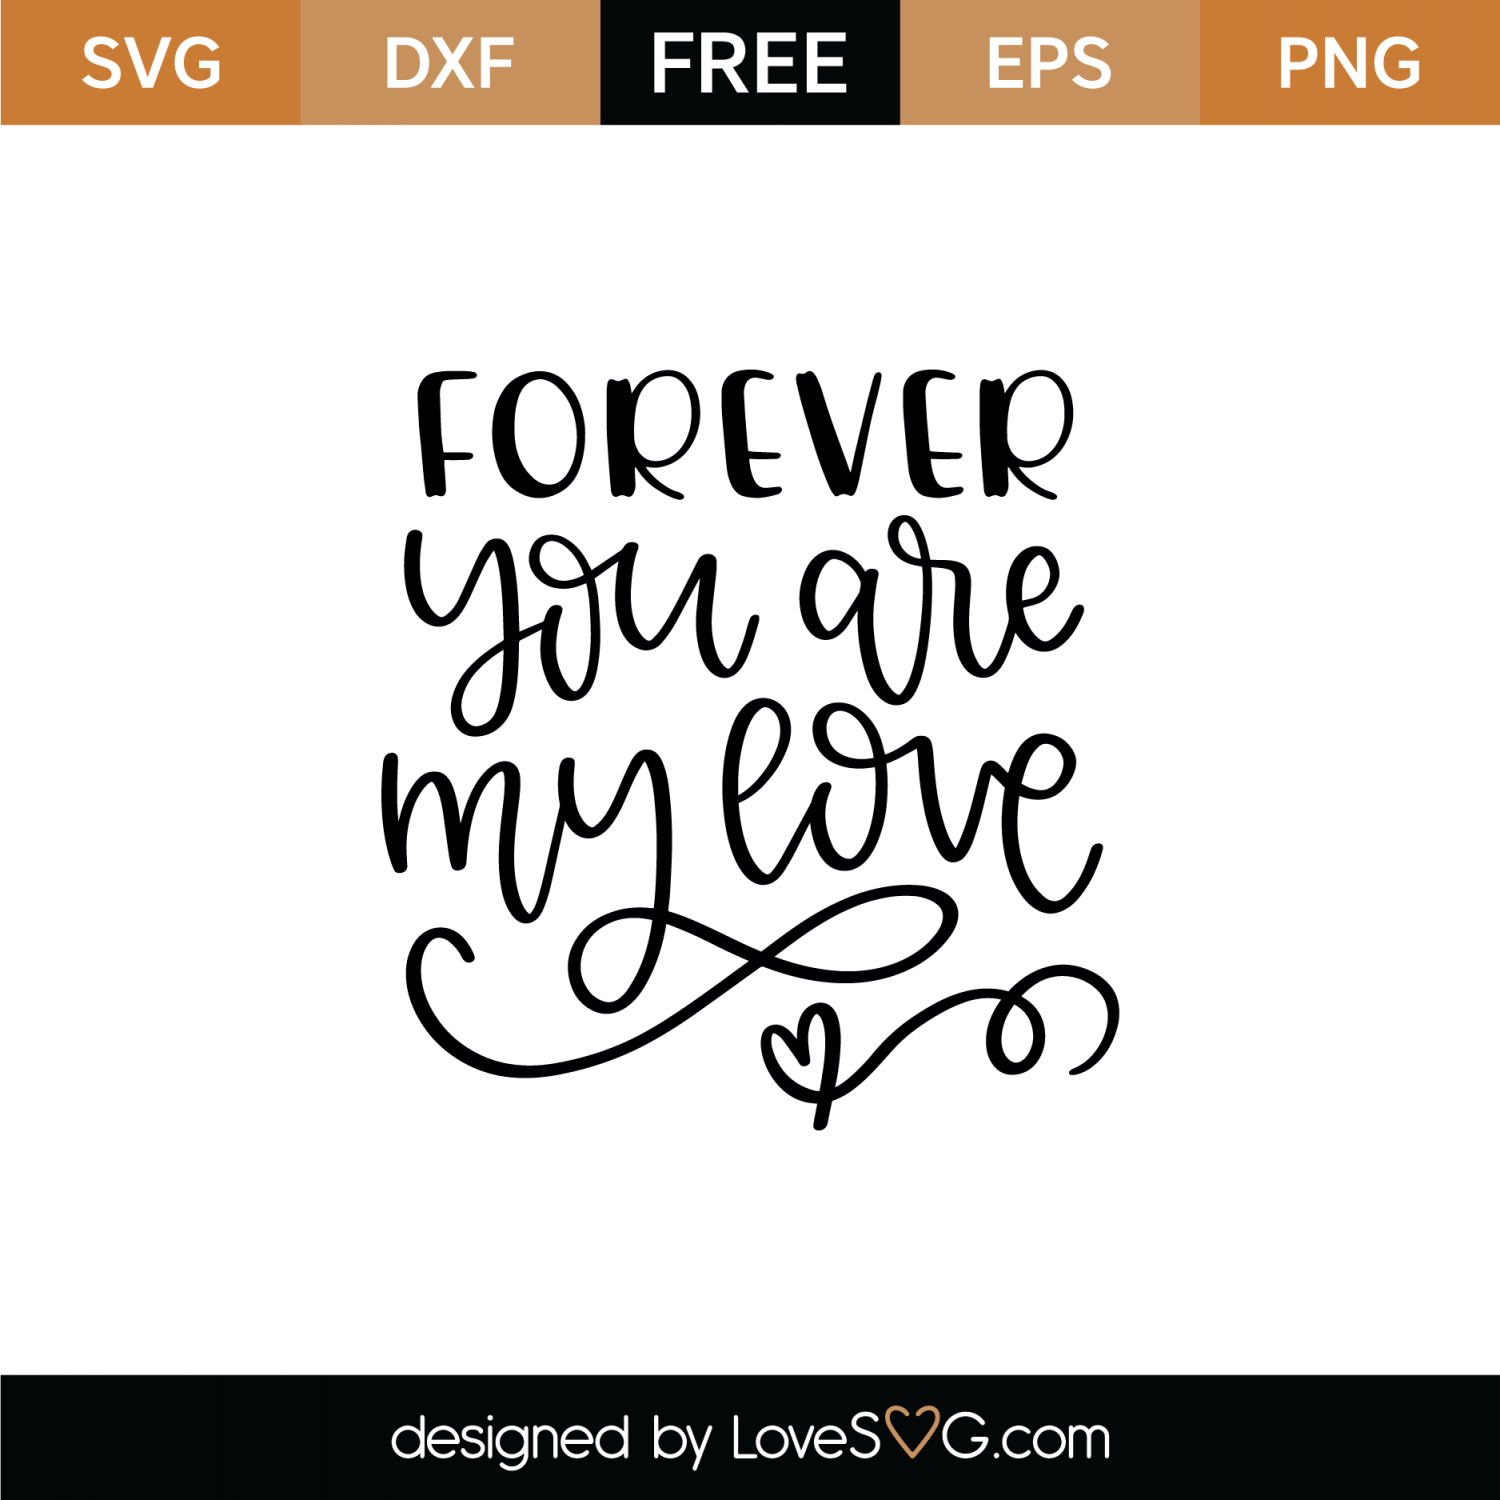 Free Forever You Are My Love SVG Cut File | Lovesvg.com